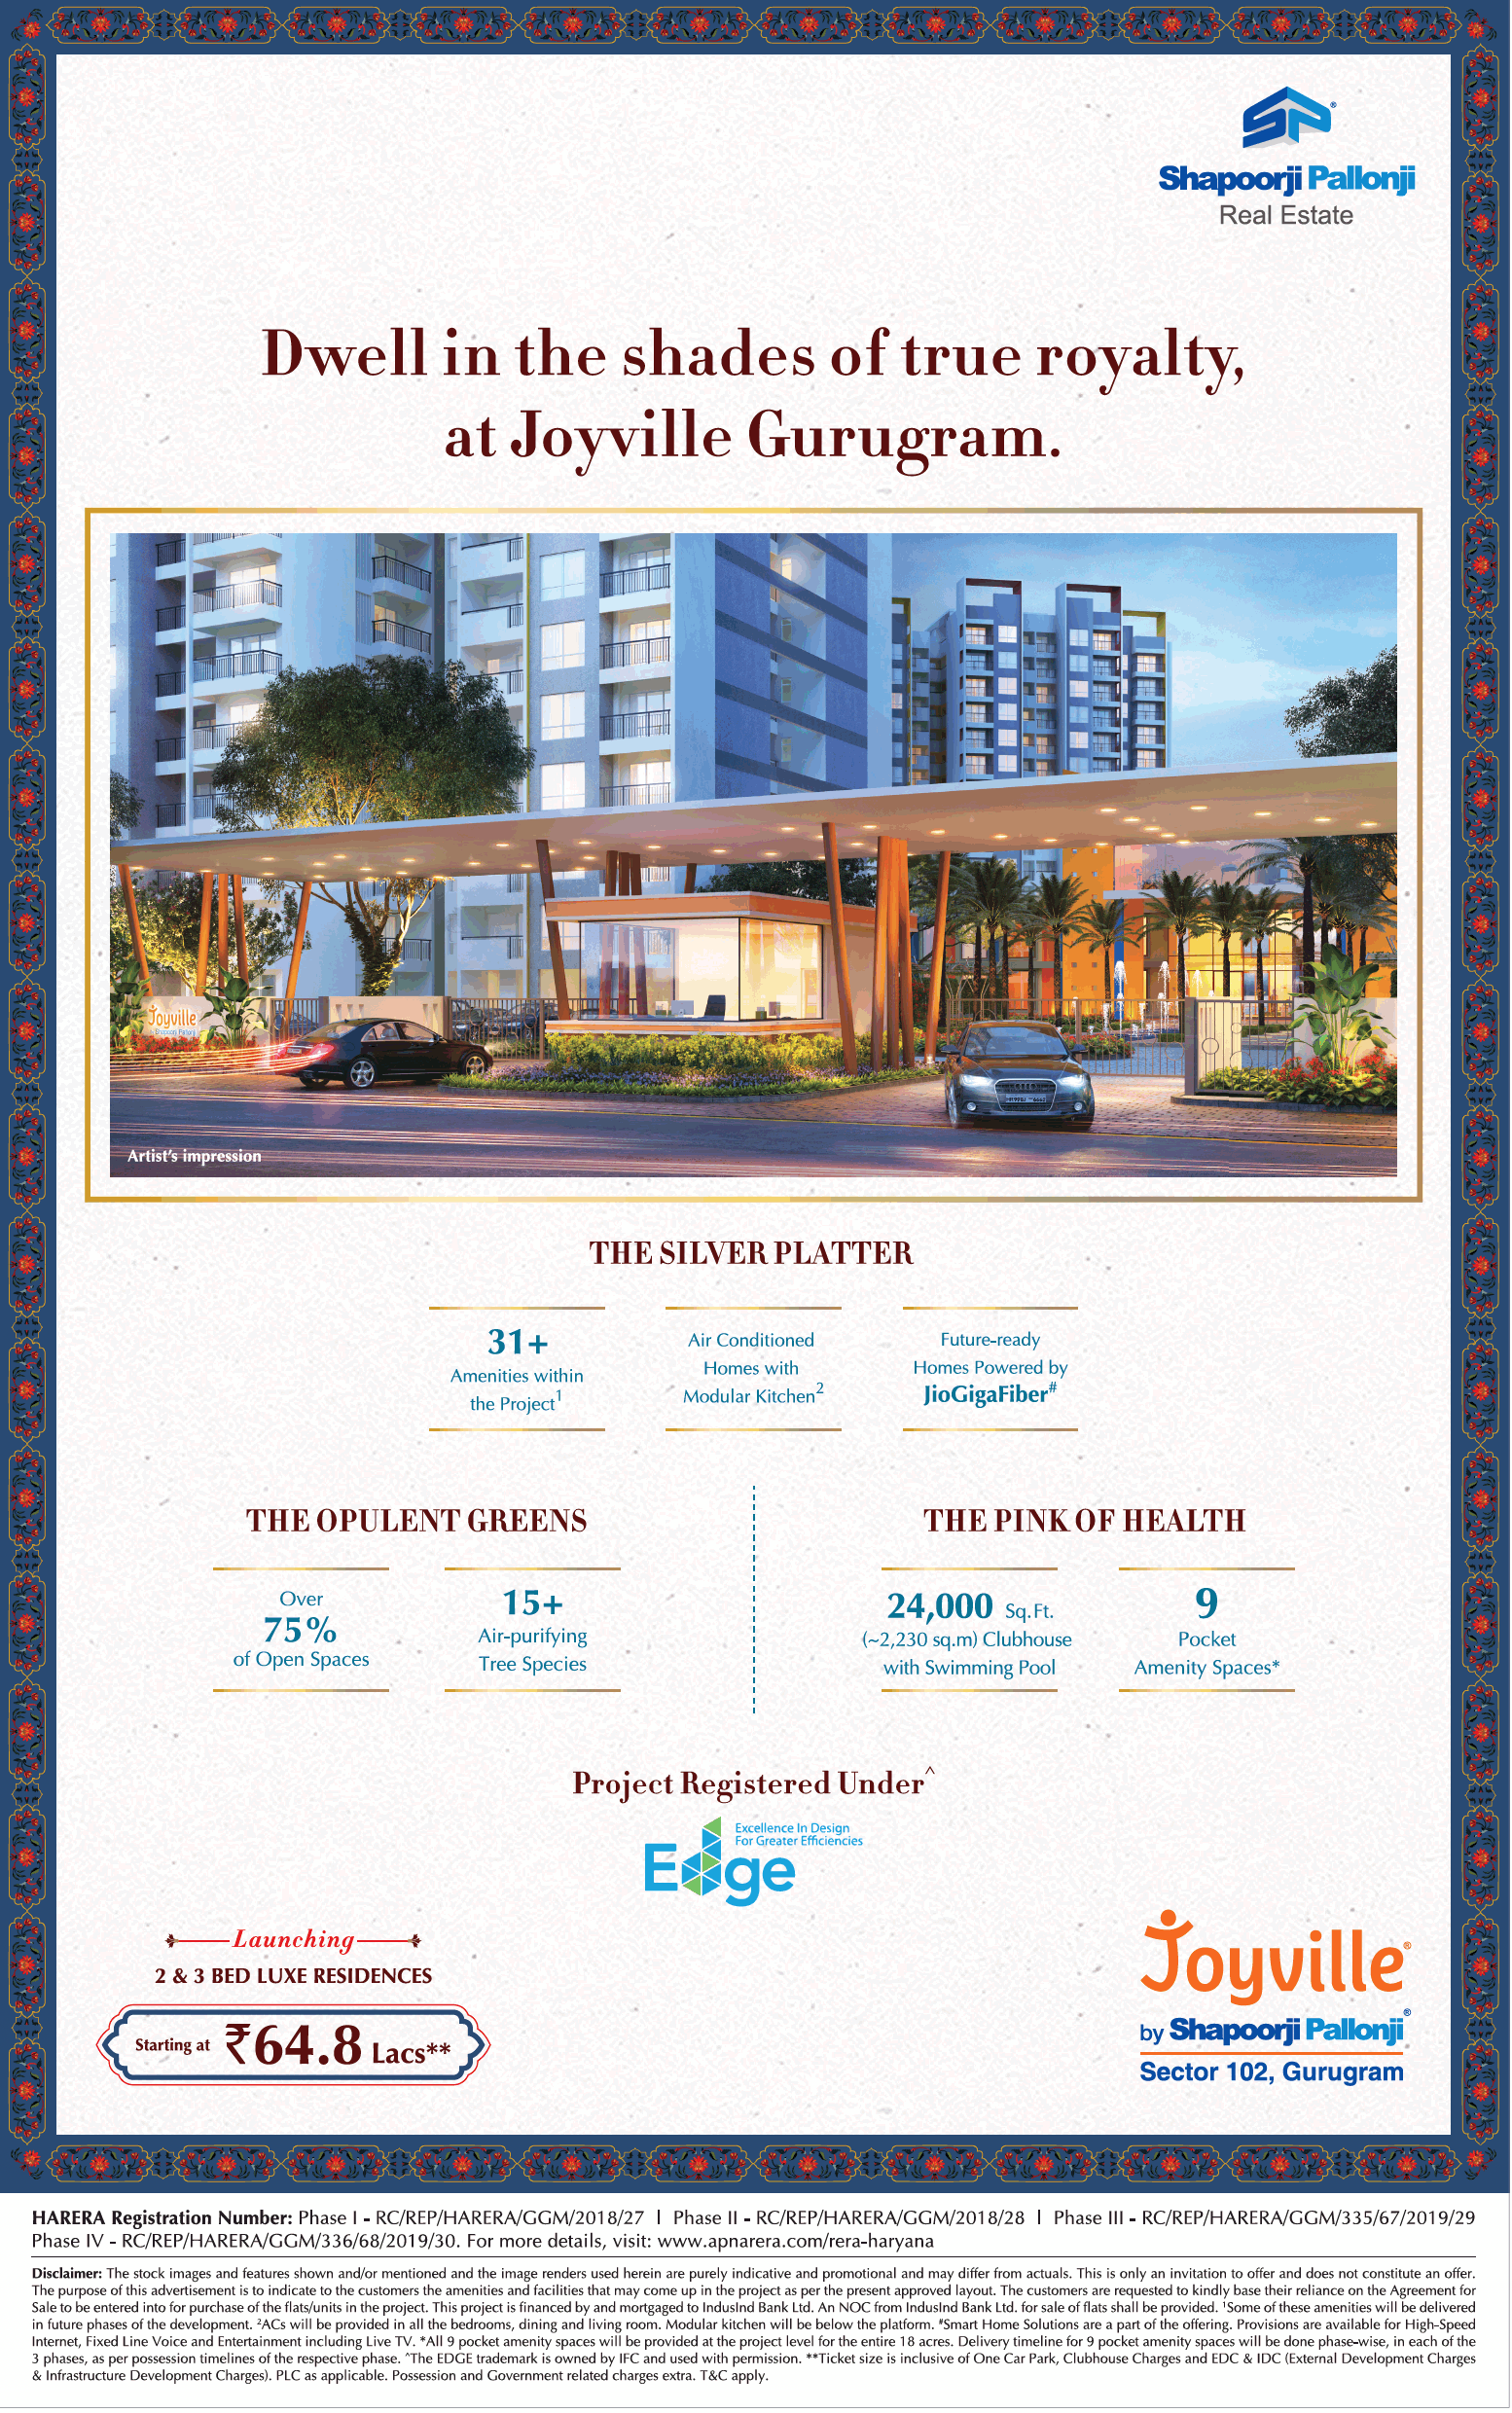 Shapoorji Pallonji Joyville Launching 2 and 3 bed luxe residences starting at Rs 64.8 Lac in Gurgaon Update